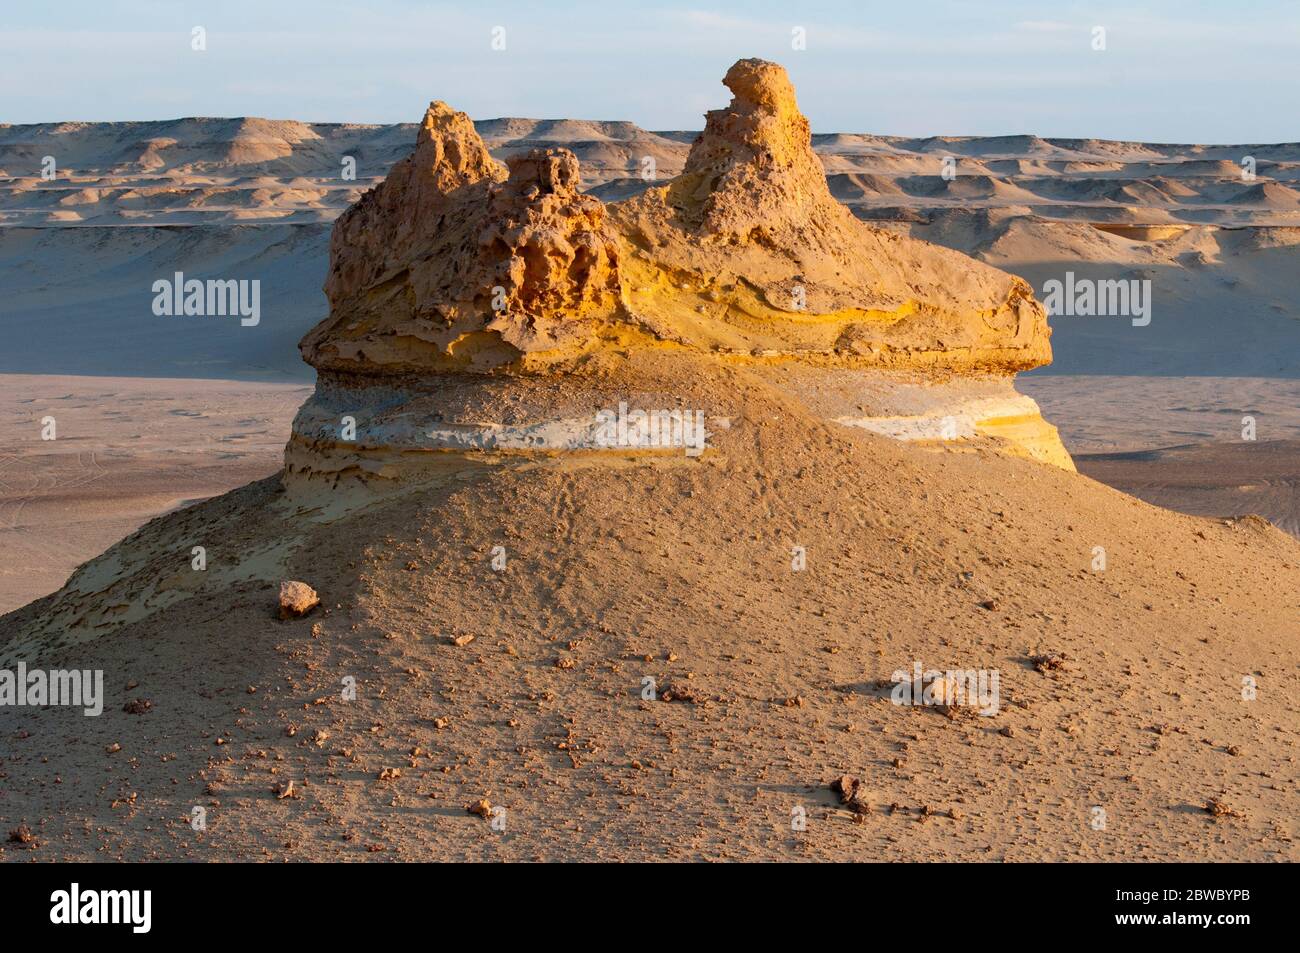 Desert landforms formed by wind erosion at Wadi El Hitan, Valley of the Fossils, in Egypt's Western Desert Stock Photo